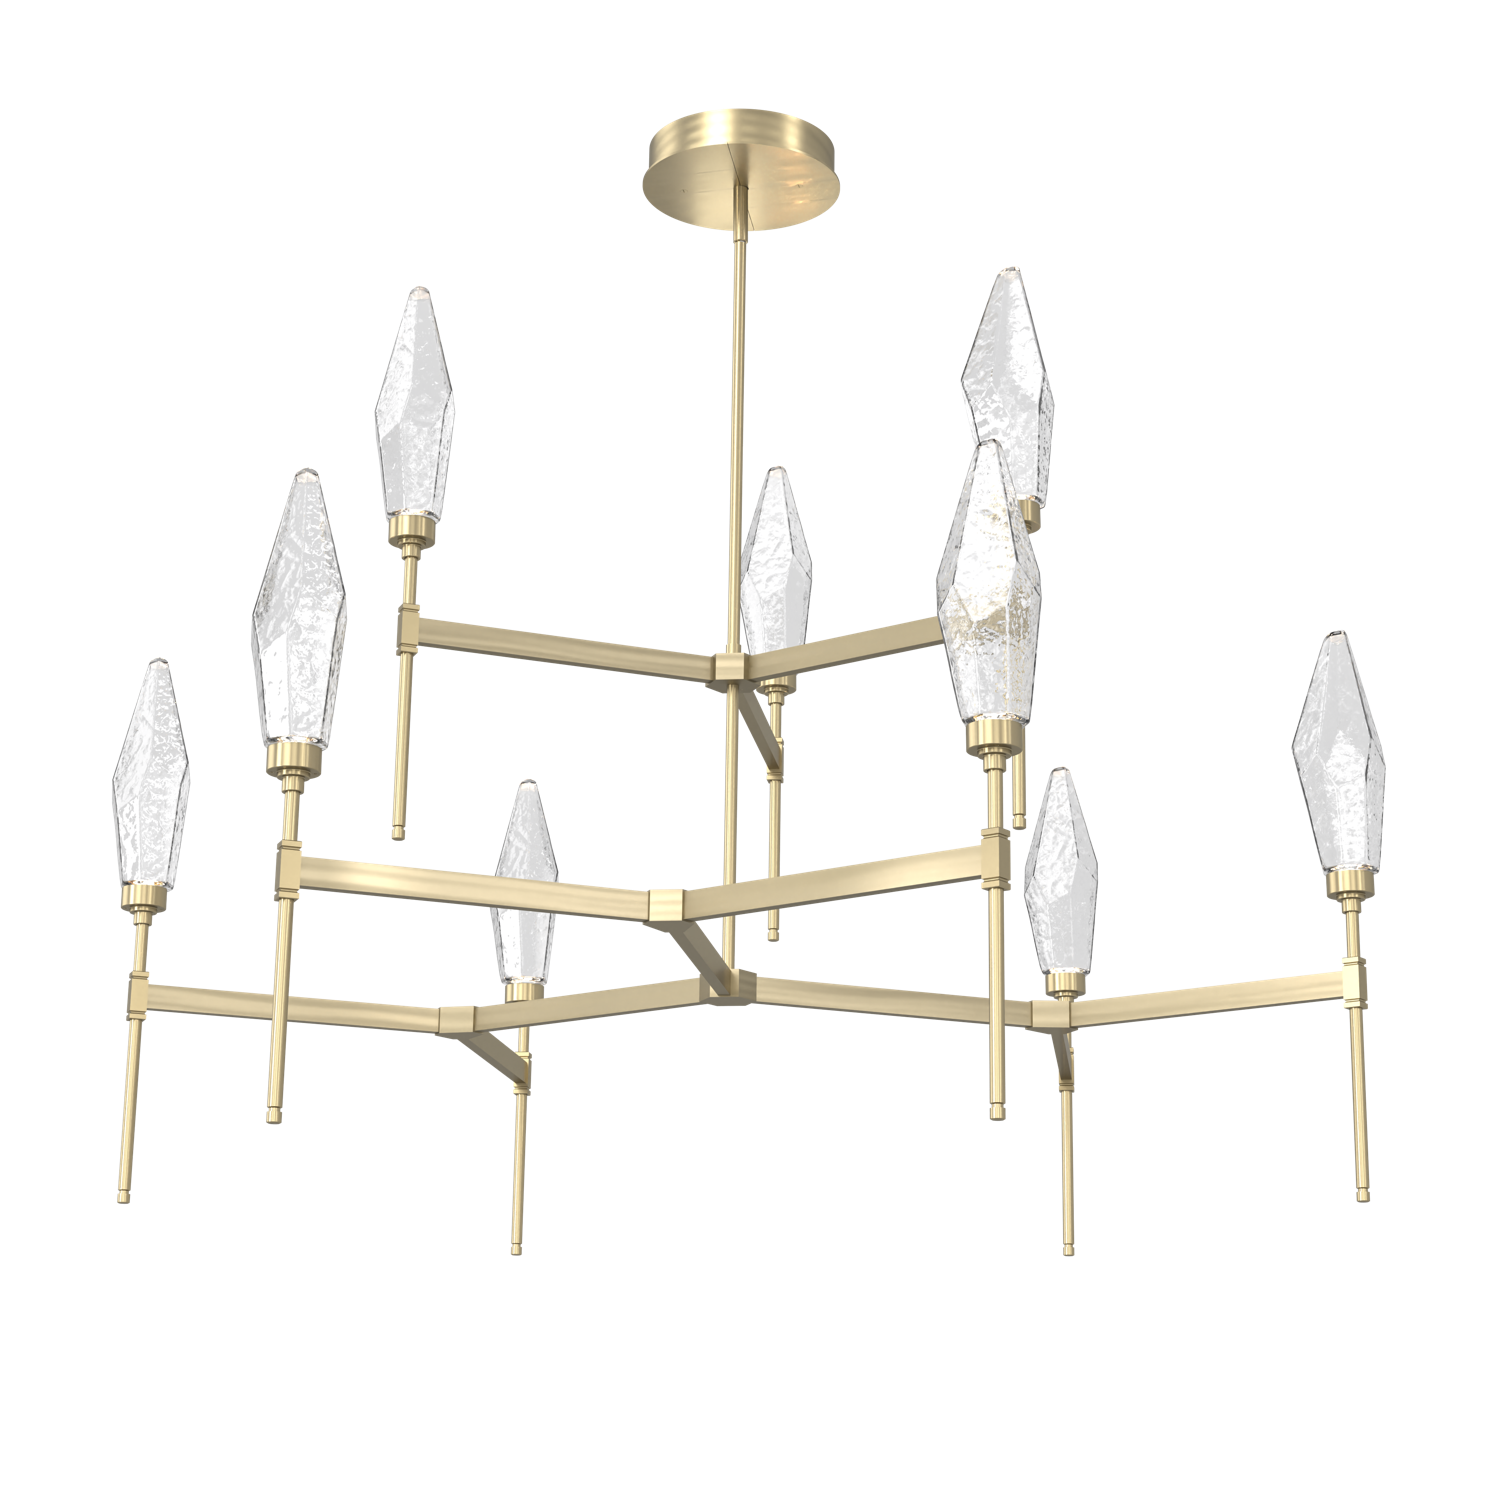 CHB0050-54-HB-CC-Hammerton-Studio-Rock-Crystal-54-inch-round-two-tier-belvedere-chandelier-with-heritage-brass-finish-and-clear-glass-shades-and-LED-lamping